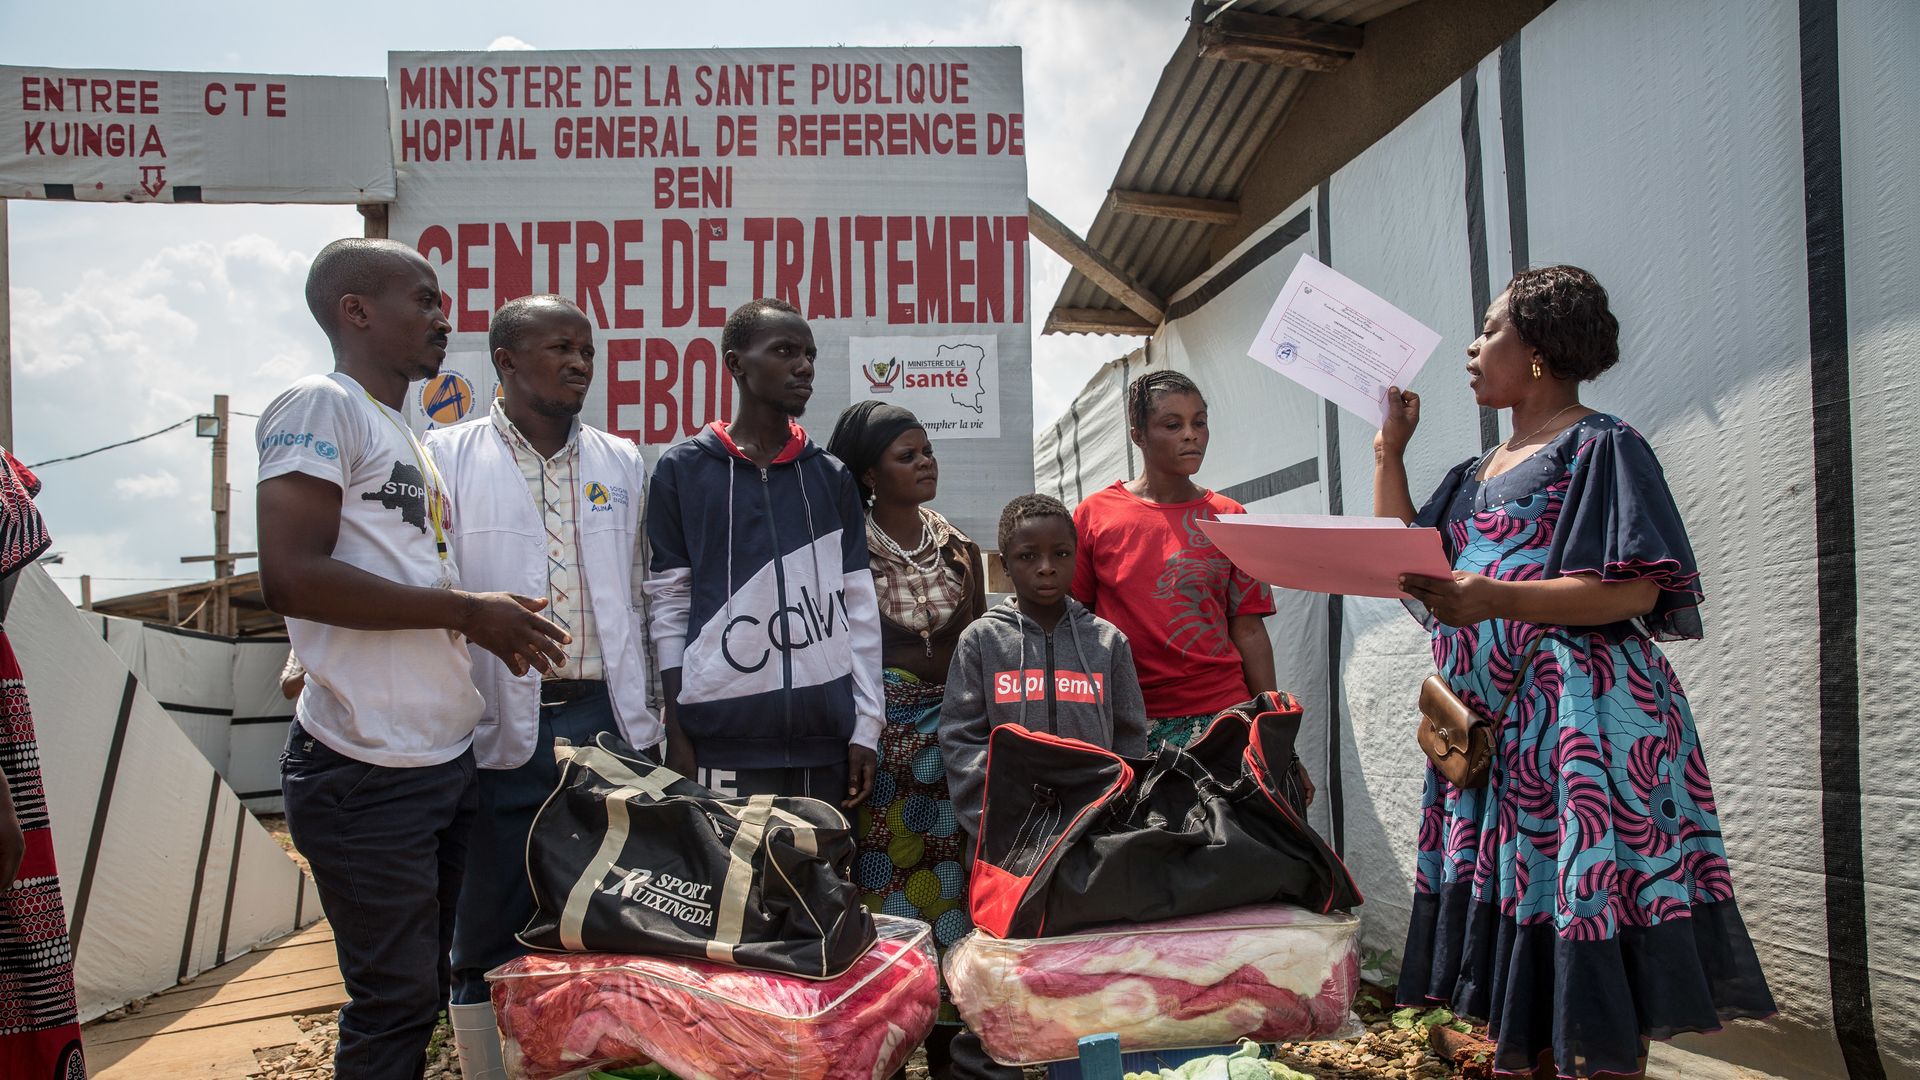 Photo of 8 year old getting certificate outside an Ebola Treatment Center in Congo declaring he is Ebola free